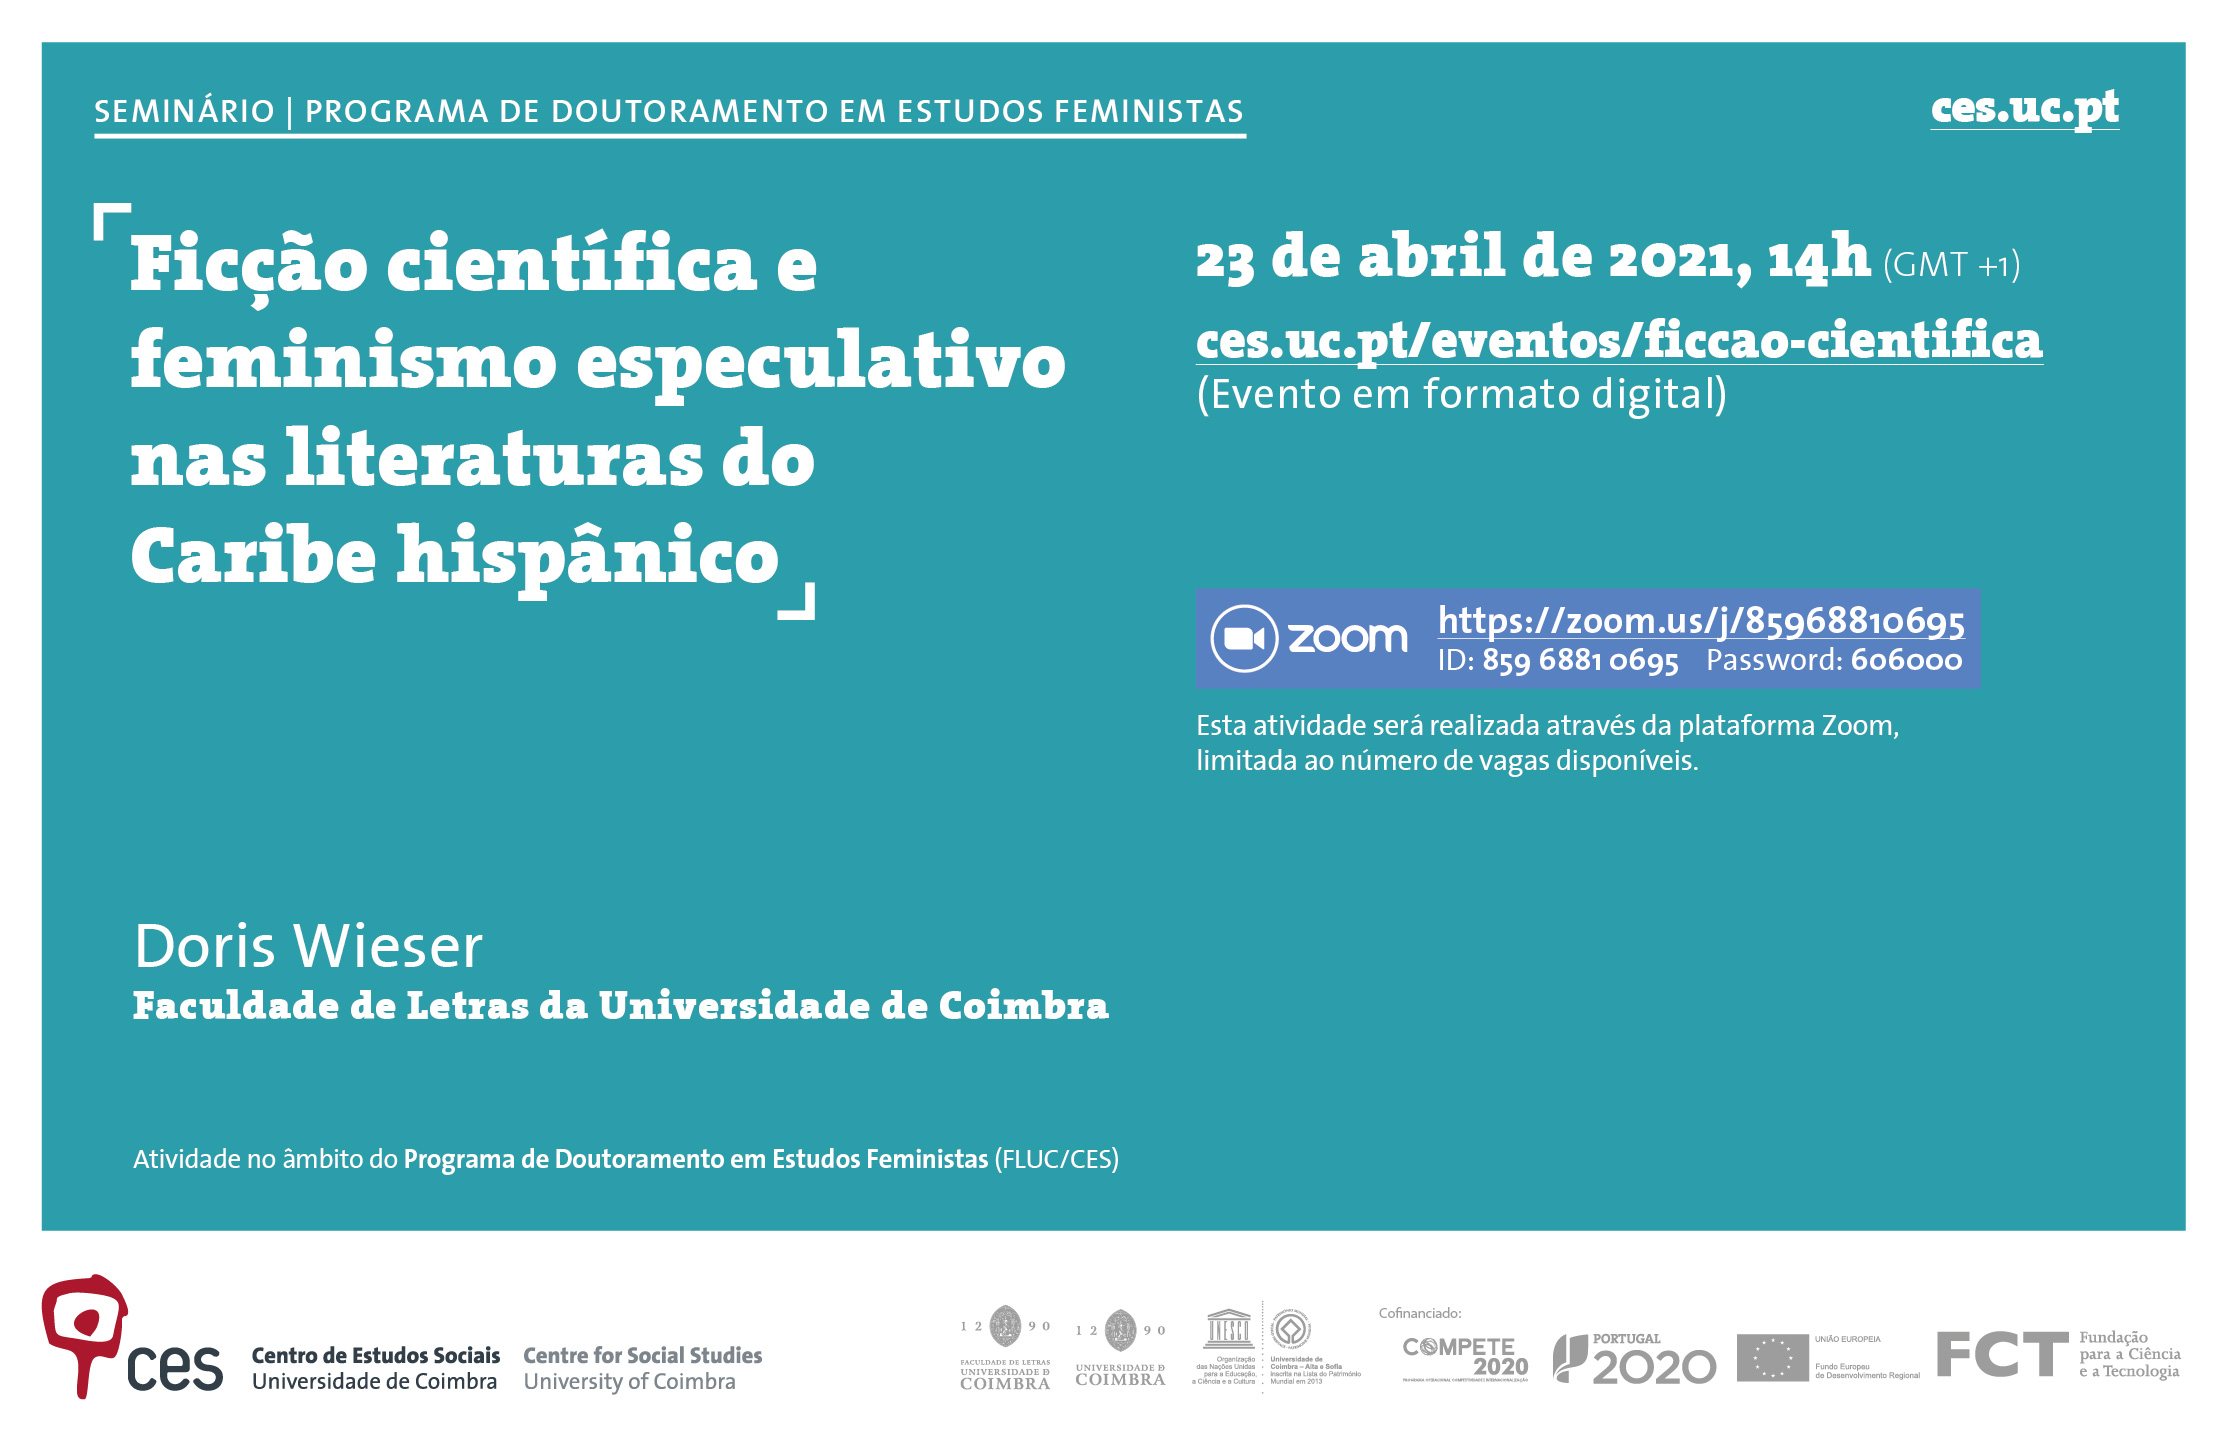 Science fiction and speculative feminism in Hispanic Caribbean literatures<span id="edit_33336"><script>$(function() { $('#edit_33336').load( "/myces/user/editobj.php?tipo=evento&id=33336" ); });</script></span>